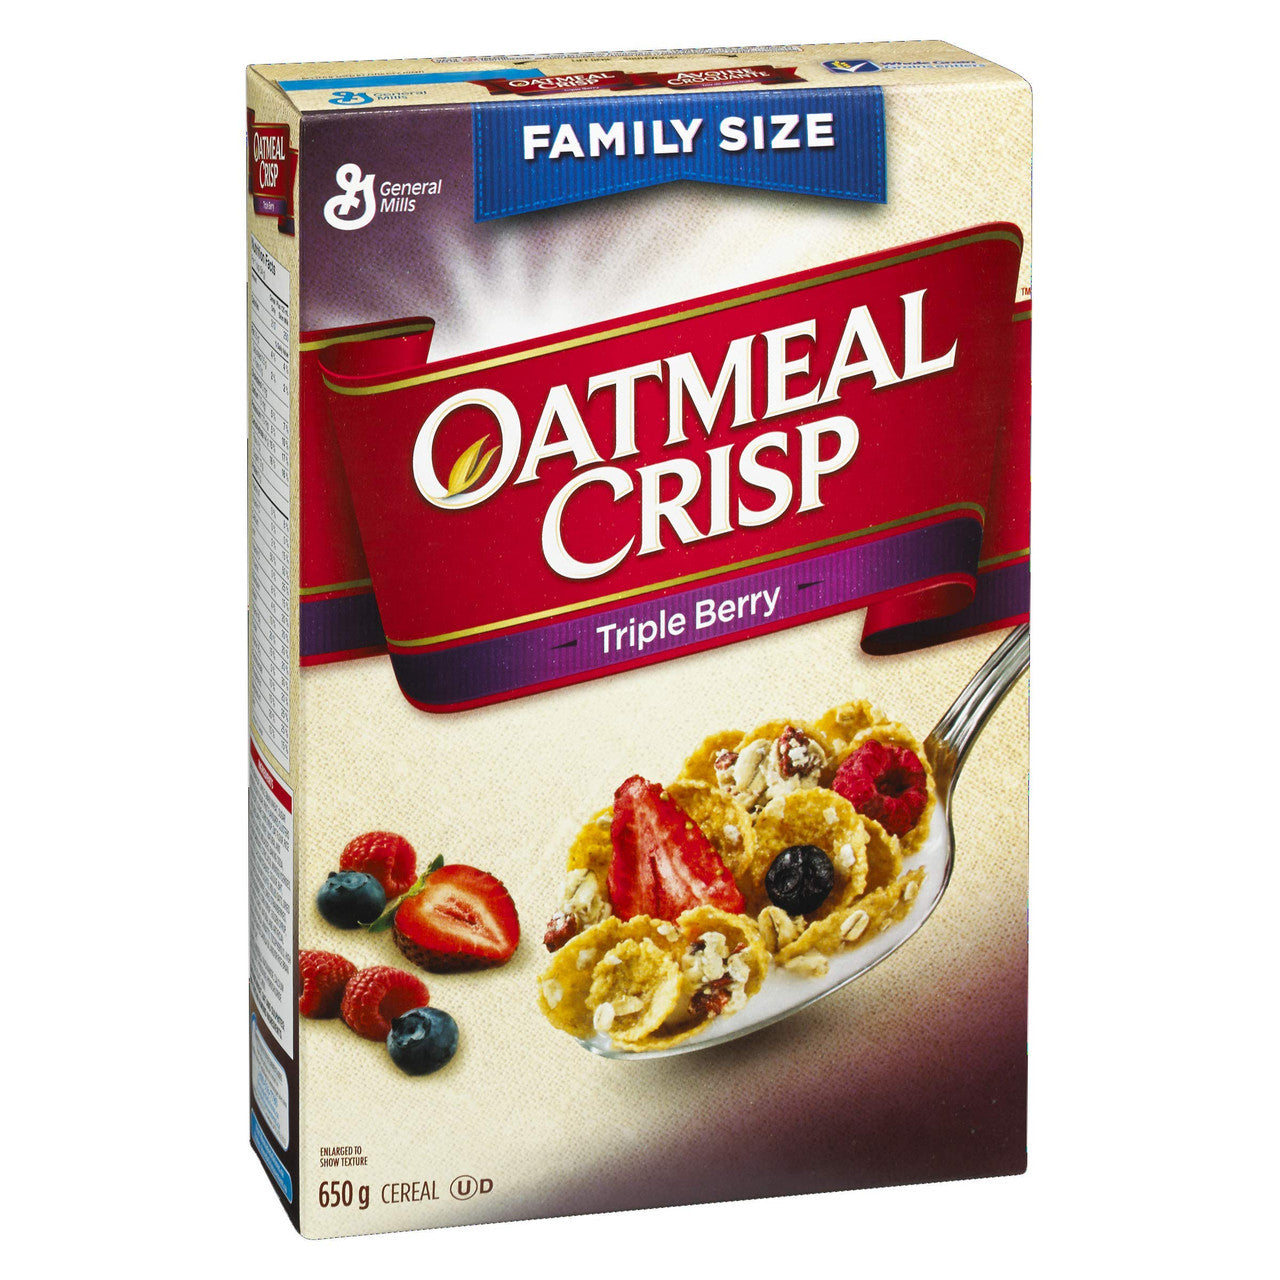 General Mills Family Size Oatmeal Crisp Triple Berry Cereal, 650g/22.9oz, (Imported from Canada)